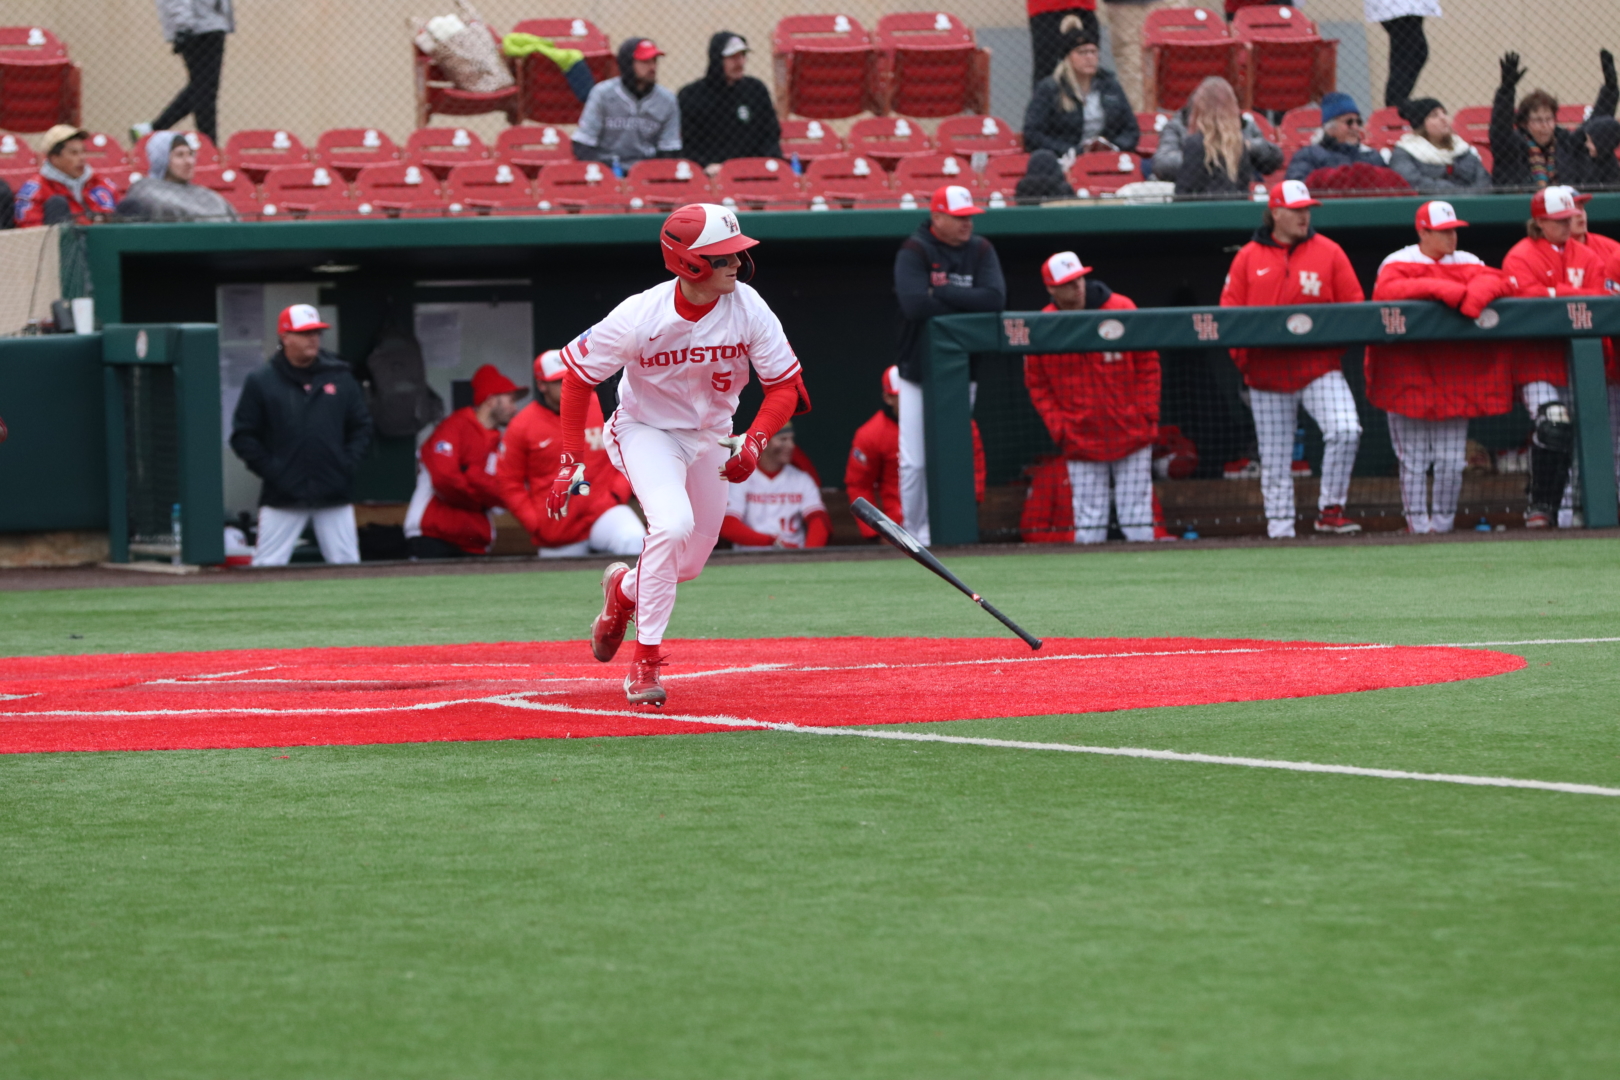 Catcher Anthony Tulimero recorded three hits and drove in two runs in UH baseball's win over Texas Southern on Friday night at Schroeder Park. | James Mueller/The Cougar